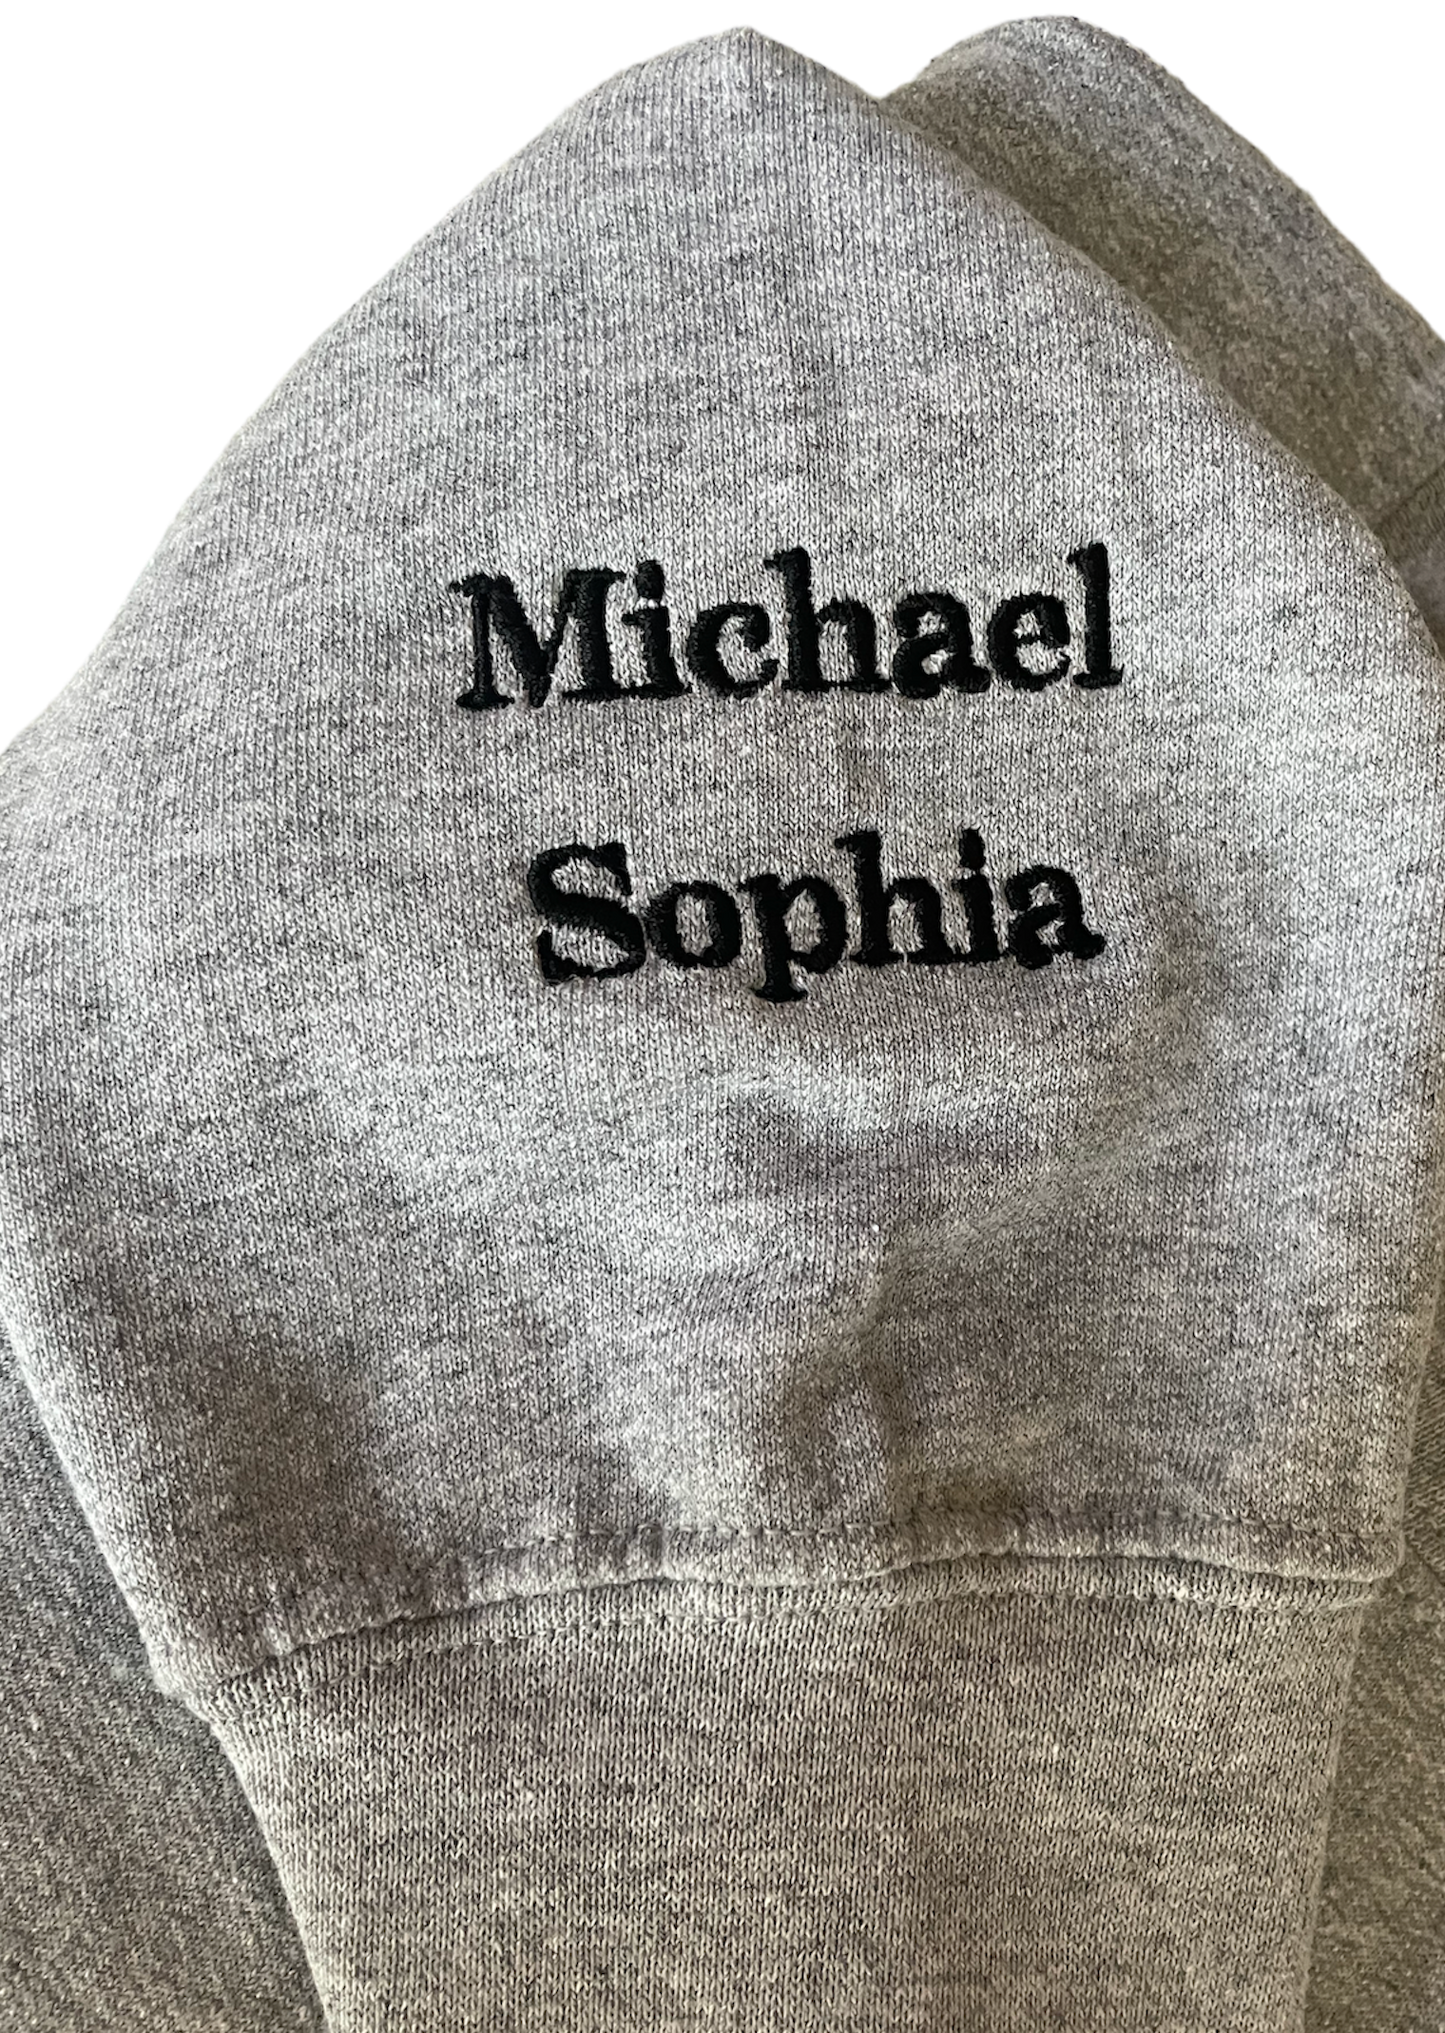 Names embroidered on sleeve